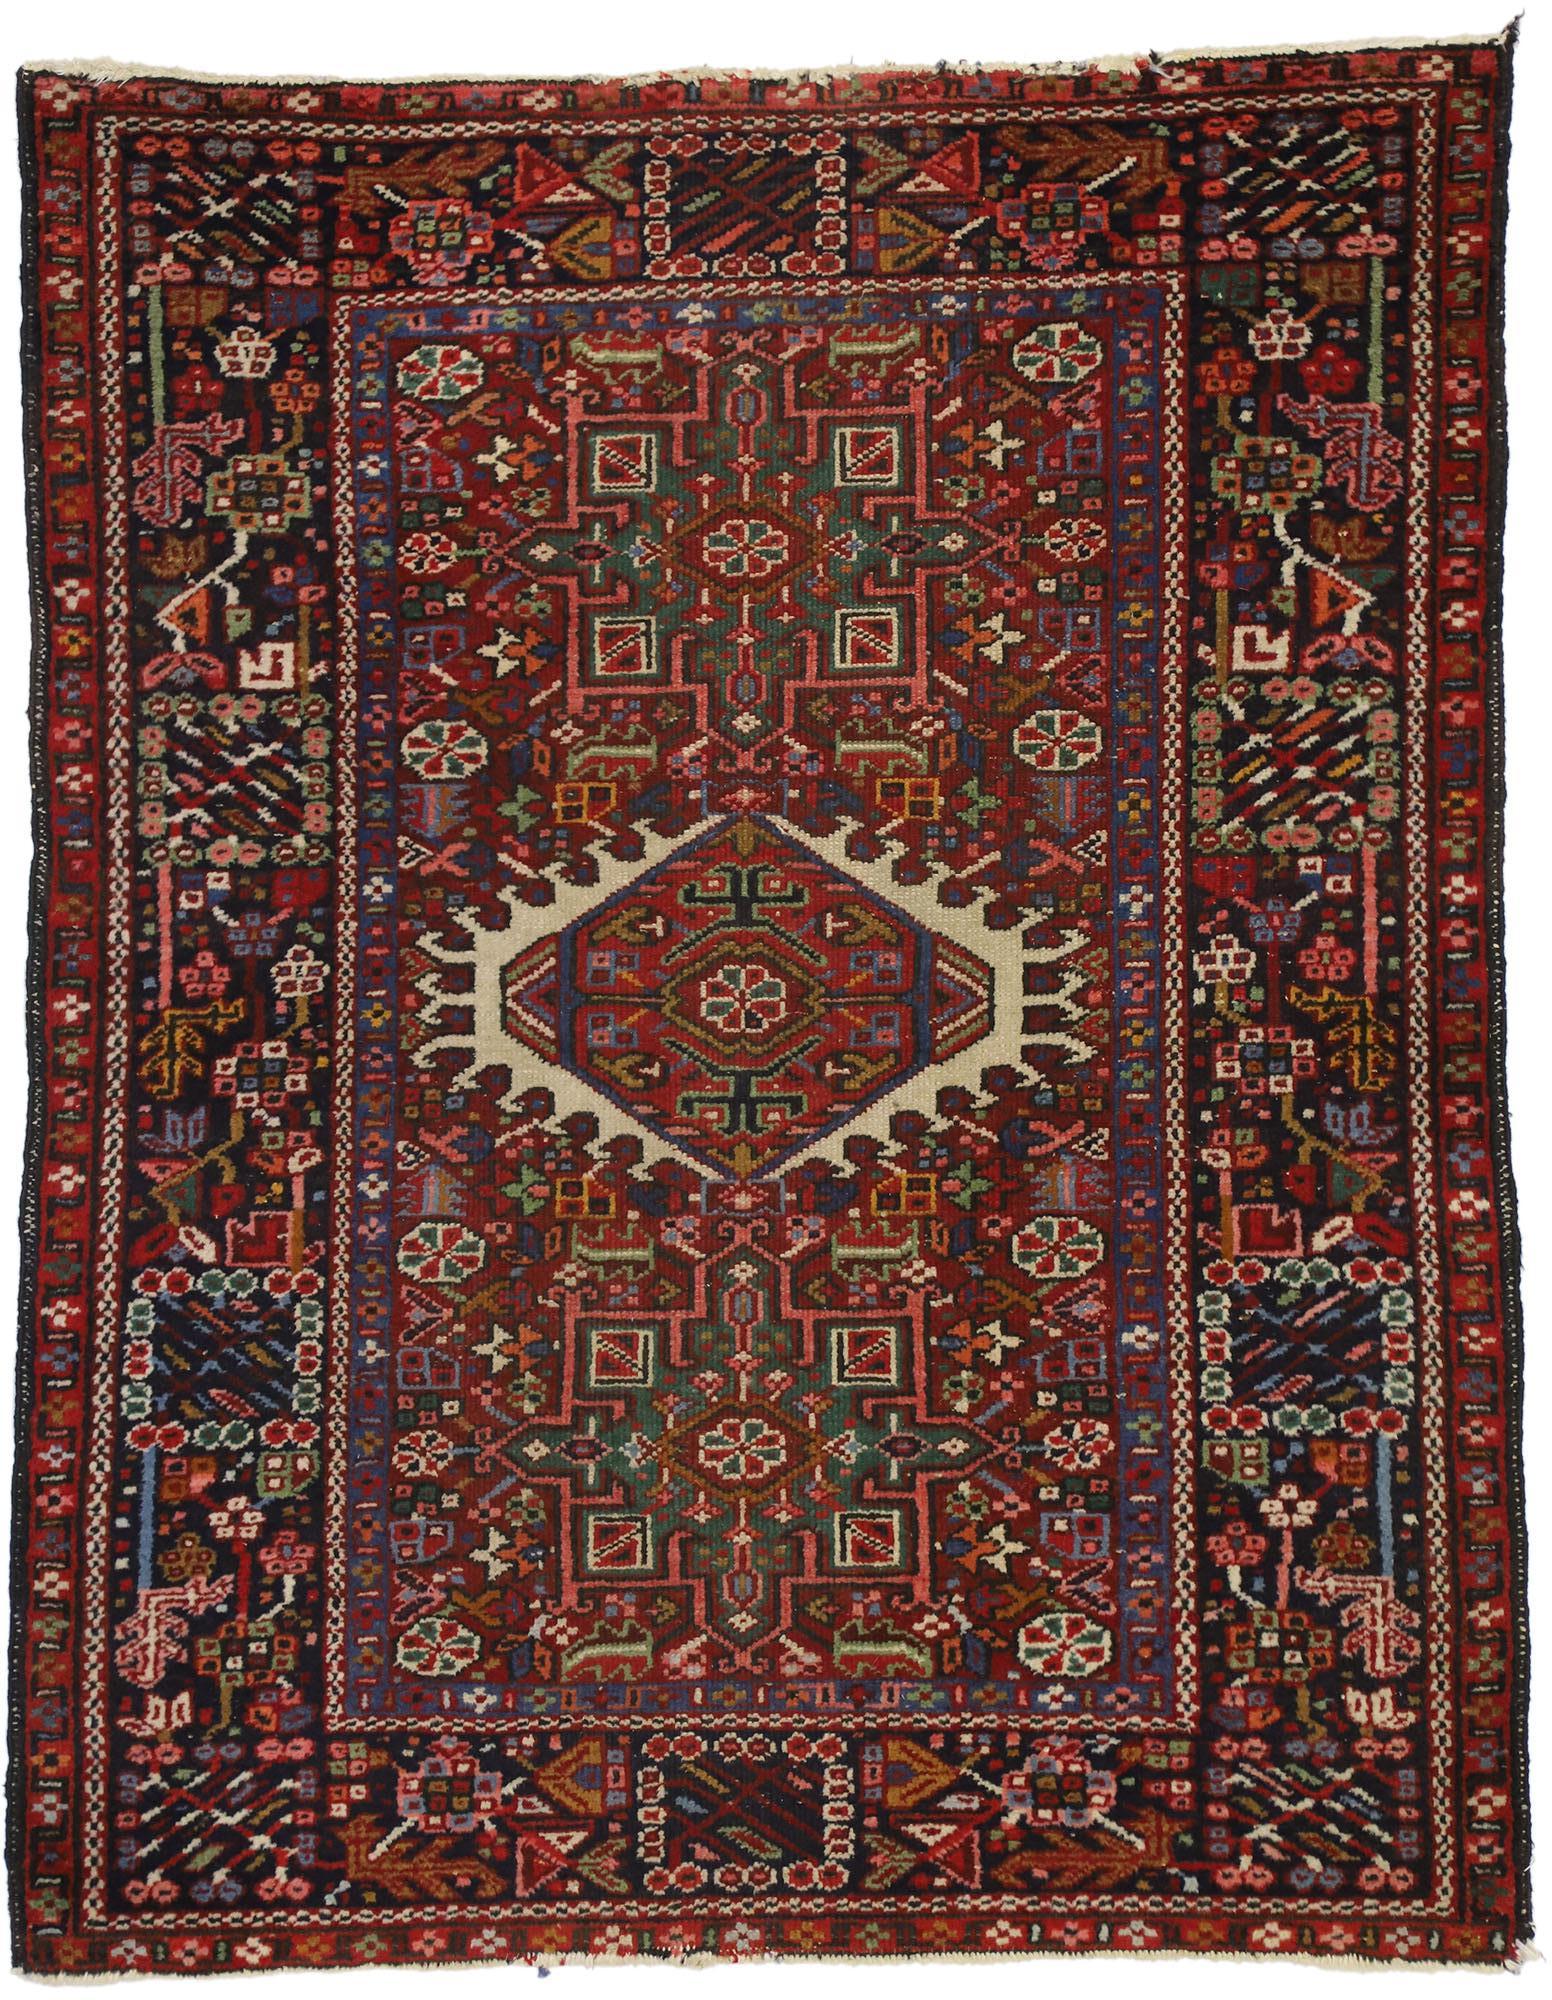 76895 Antique Persian Karaja Heriz Rug with Mid-Century Modern Style, Accent Rug 03'06 x 04'05. This hand knotted wool antique Persian Karaja Heriz rug with Mid-Century Modern style features a latch-hook octogram amulet flanked by two square